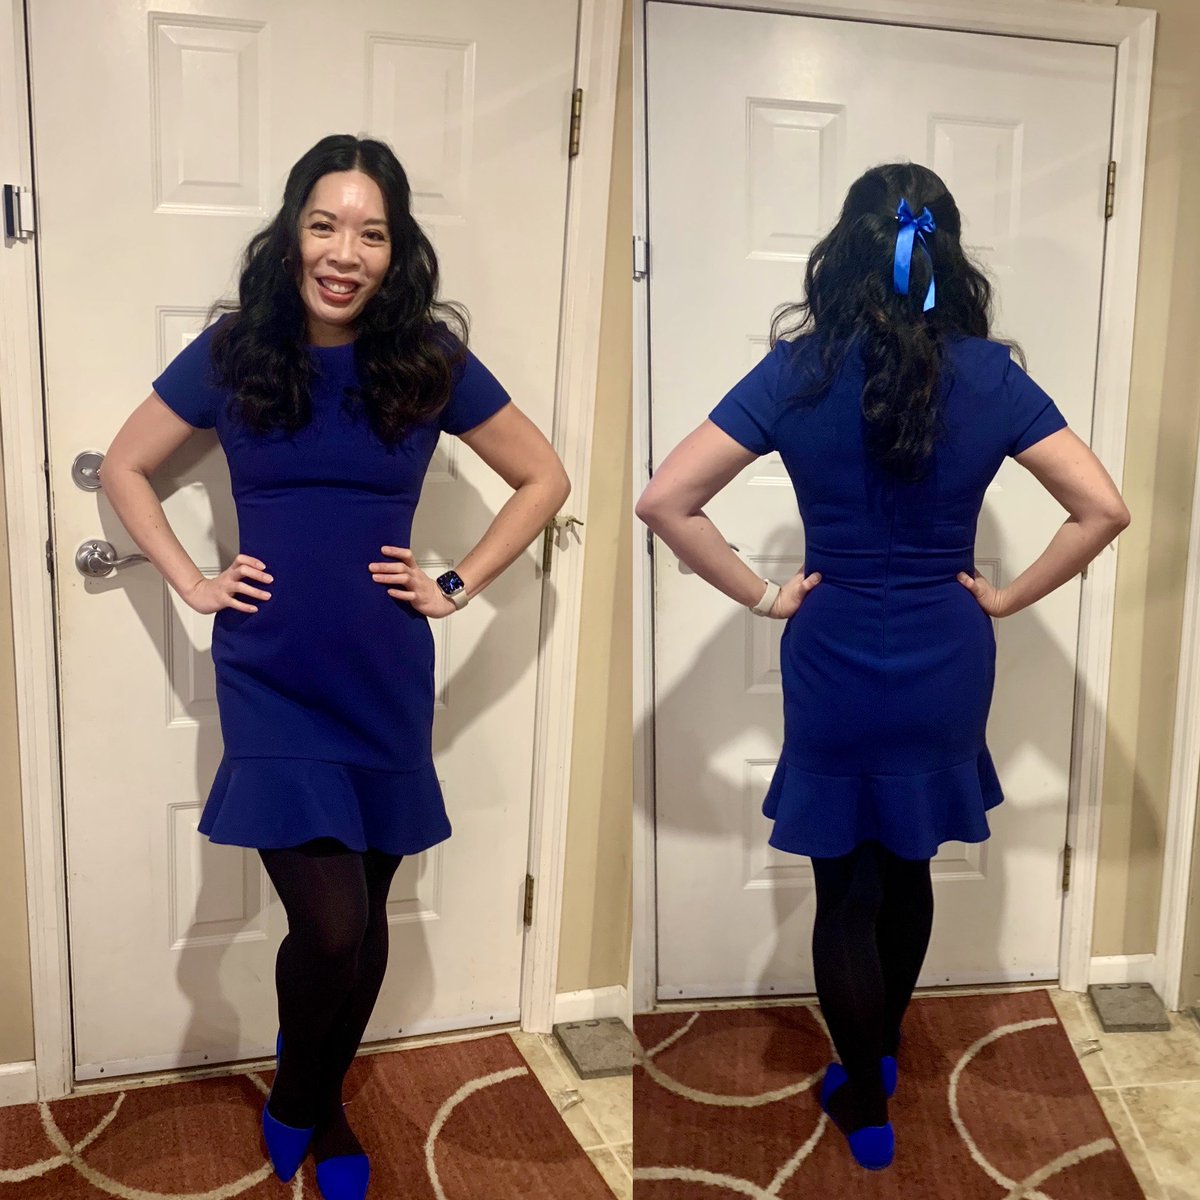 Keeping it going with #DressInBlue head-to-toe and front-to-back. With March being #ColorectalCancerAwarenessMonth and the month I was diagnosed, it’s always a poignant and reflective time 💙